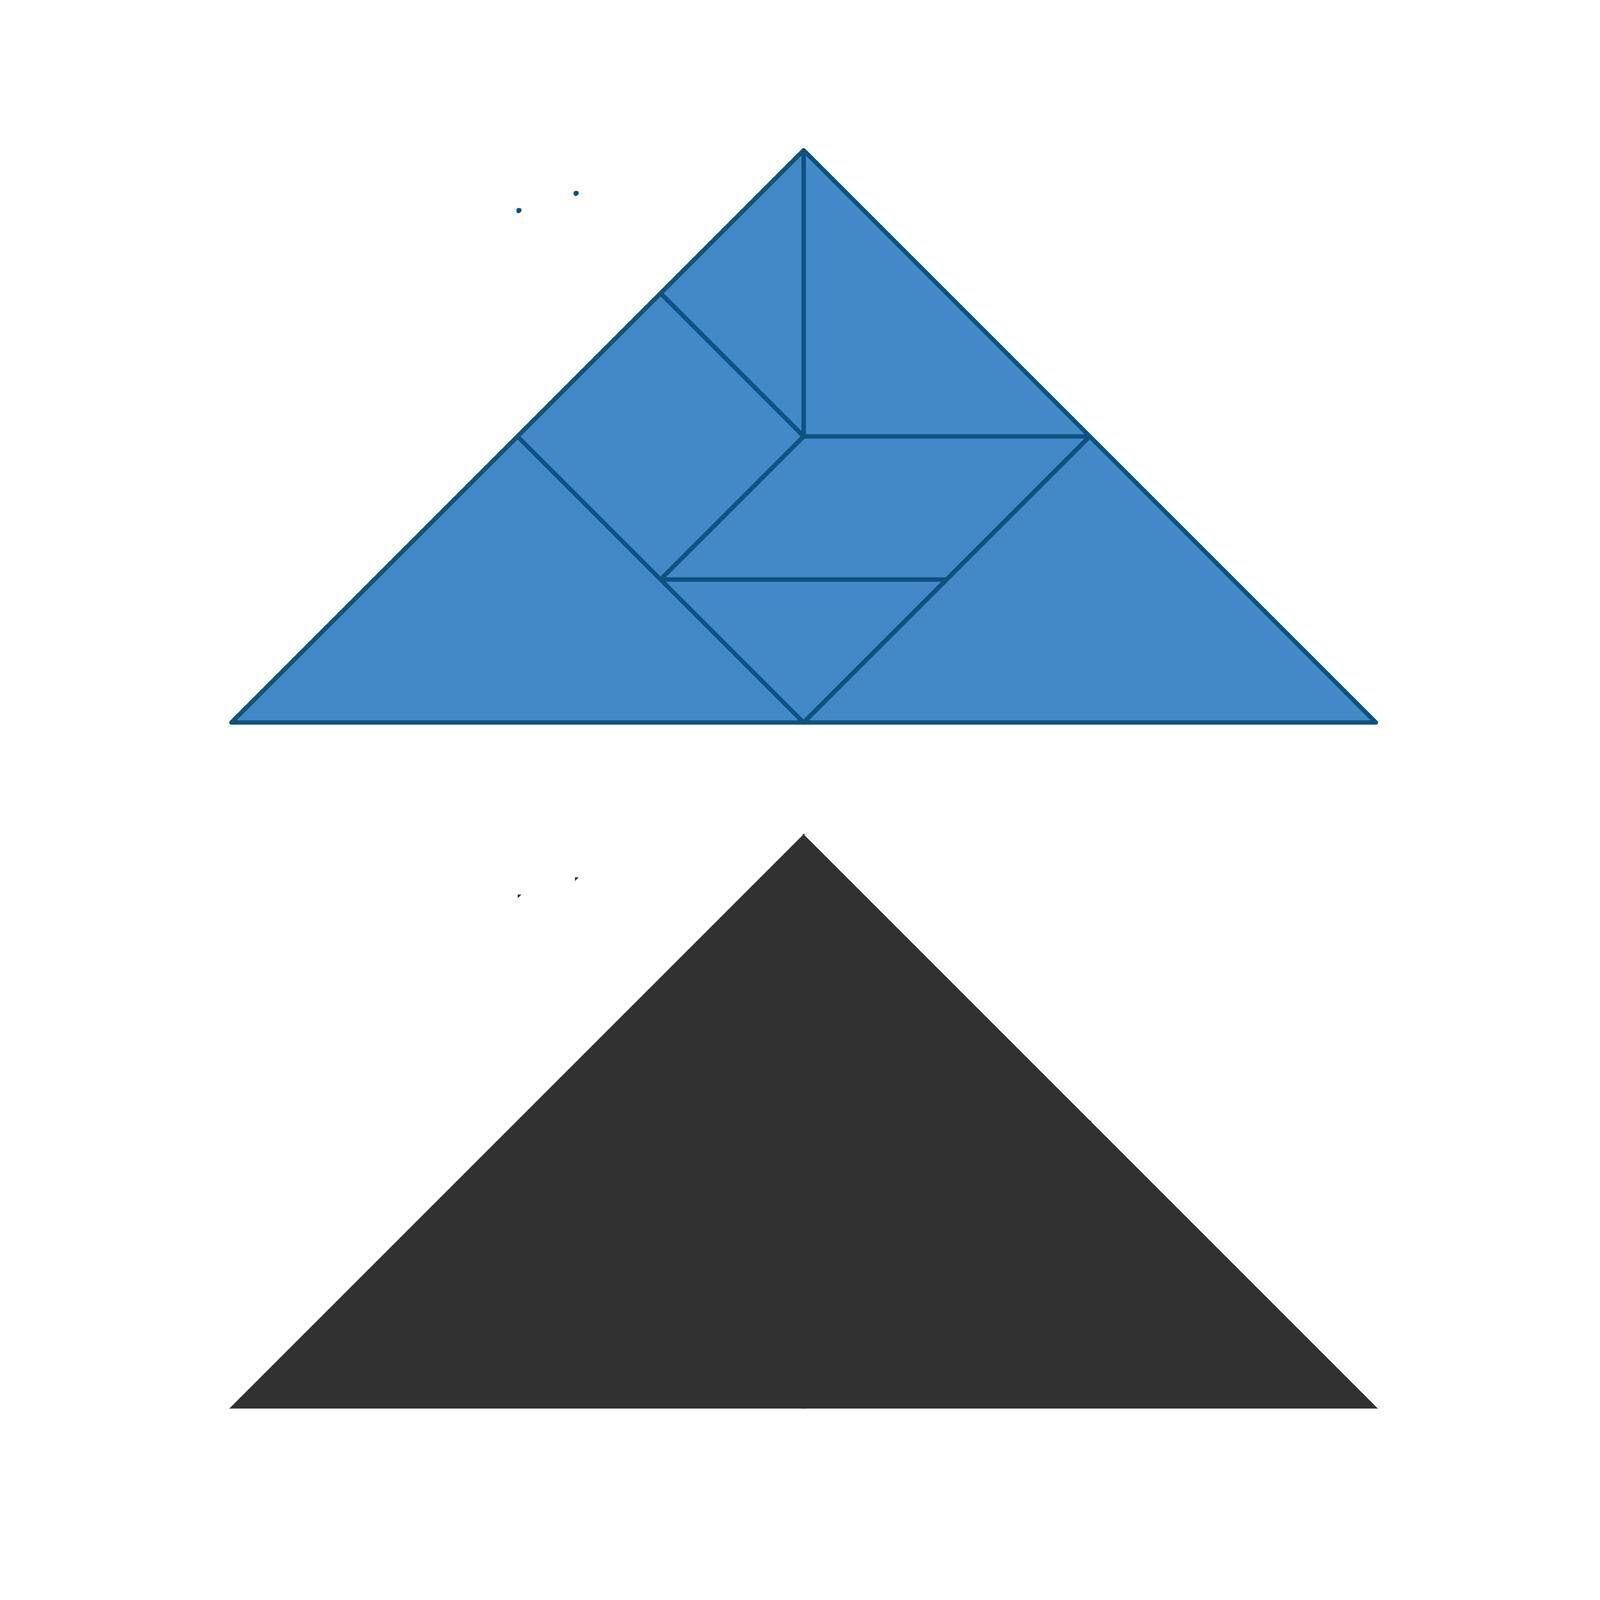 Tangram. Traditional Chinese dissection puzzle, seven tiling pieces - geometric shapes: triangles, square rhombus , parallelogram. Board game for kids that helps to develop analytical skills. Vector by Kyrylov